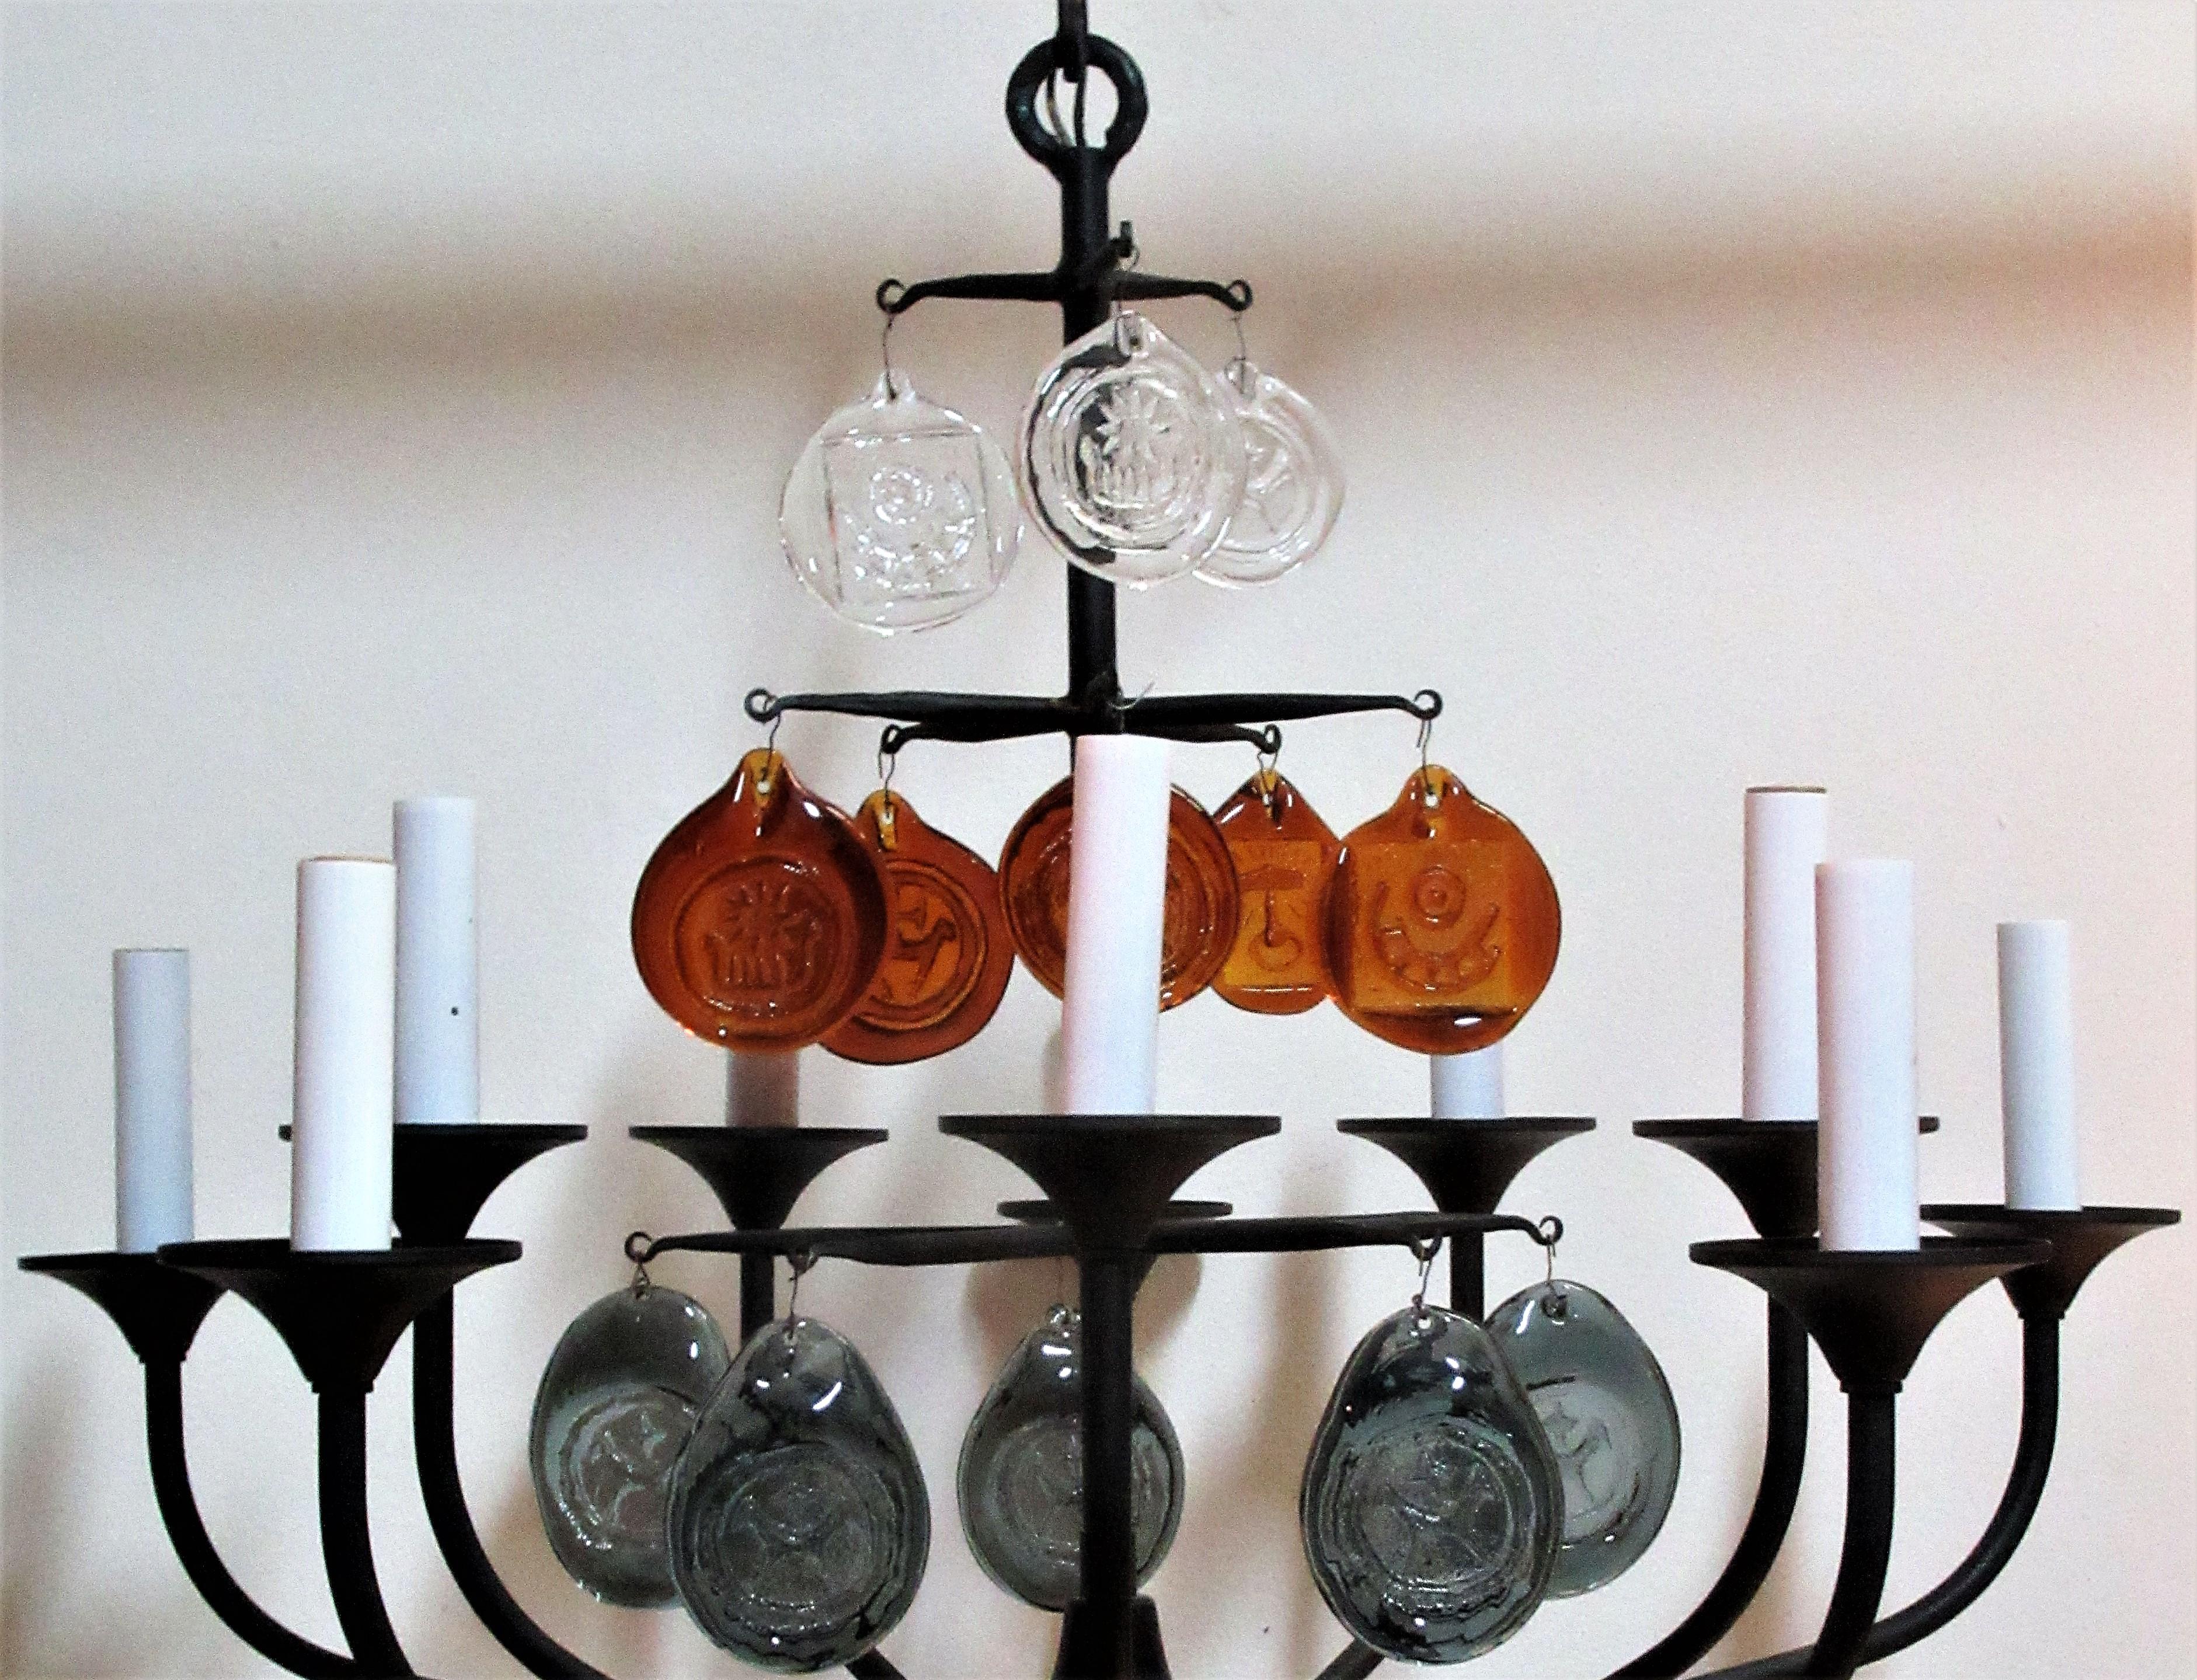 1950's Danish black iron Viking chandelier with ten candle armatures by Svend Aage Sorensen for Holm Sorensen Co. Denmark. There are three rows of decorative glass roundels depicting Nordic designs in relief ( total thirteen roundels ) The three top